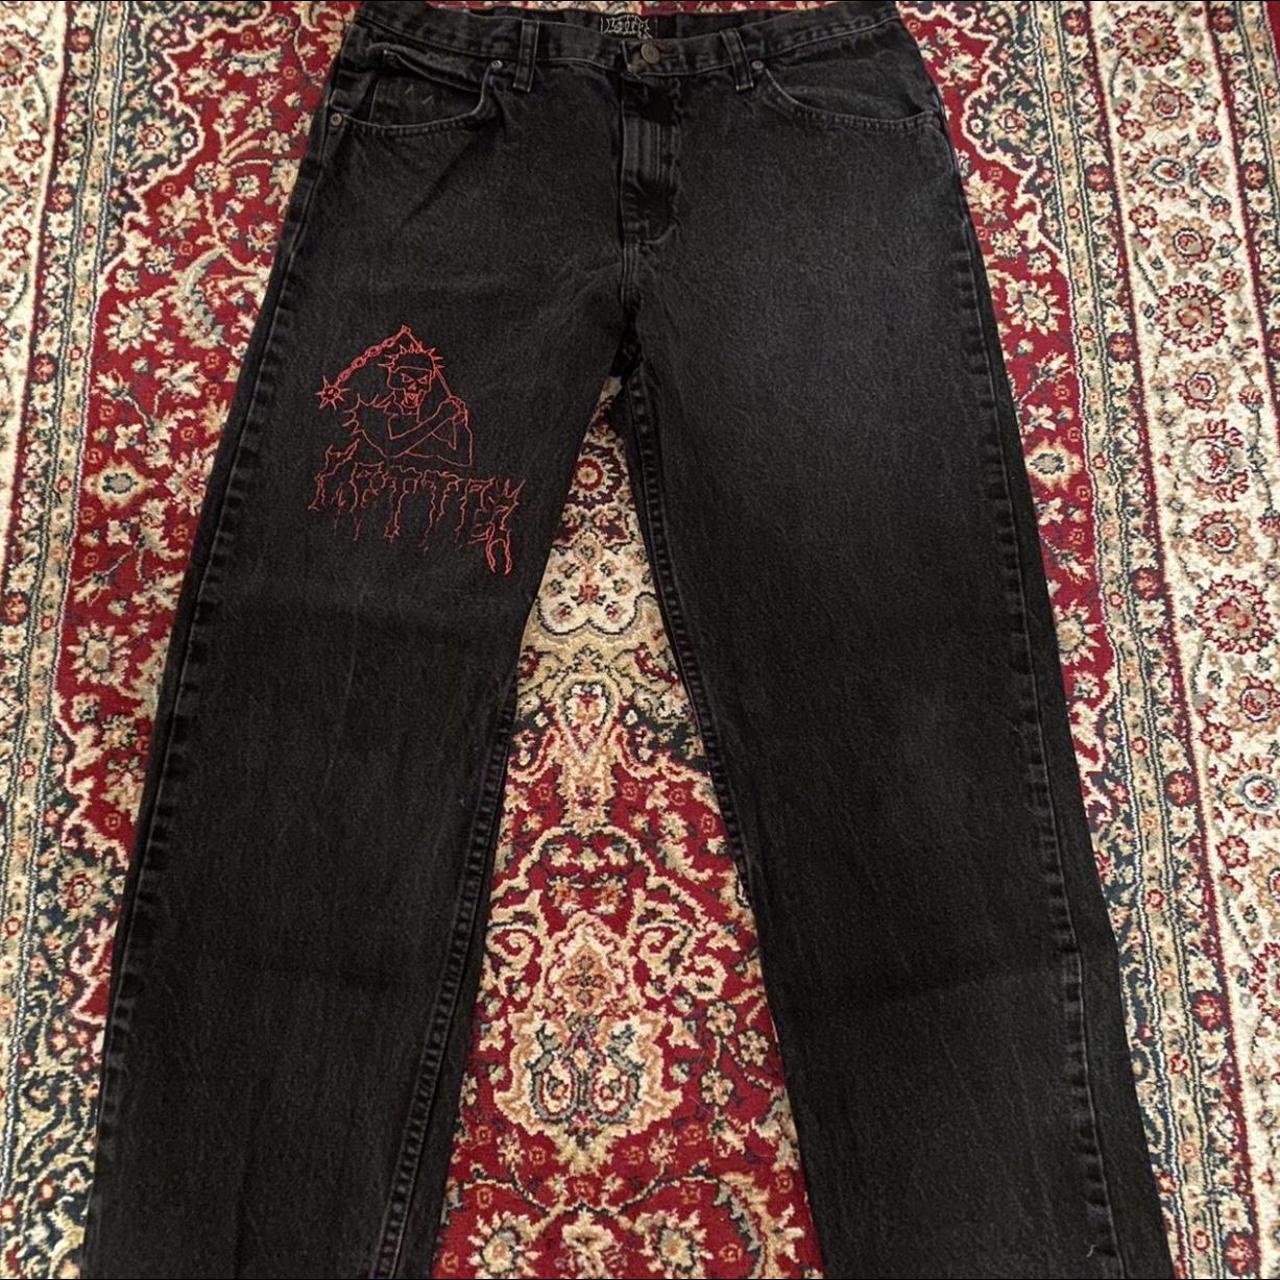 Letter co skate jeans these are so sick it’s a local... - Depop